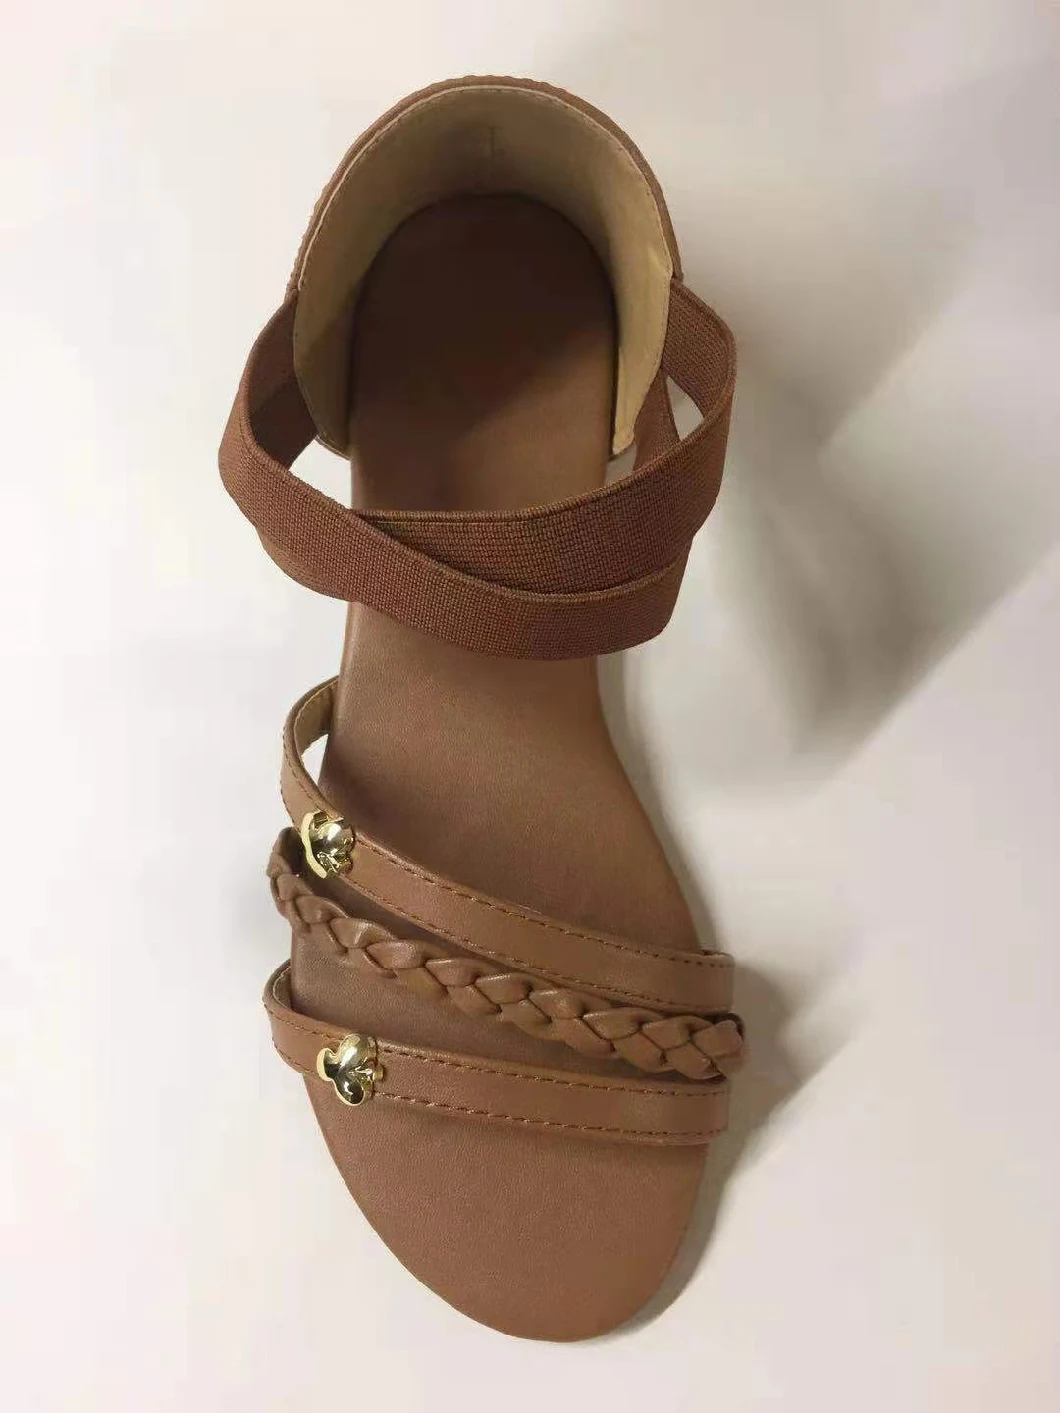 Lady Shoes Made in China Dress Sandal